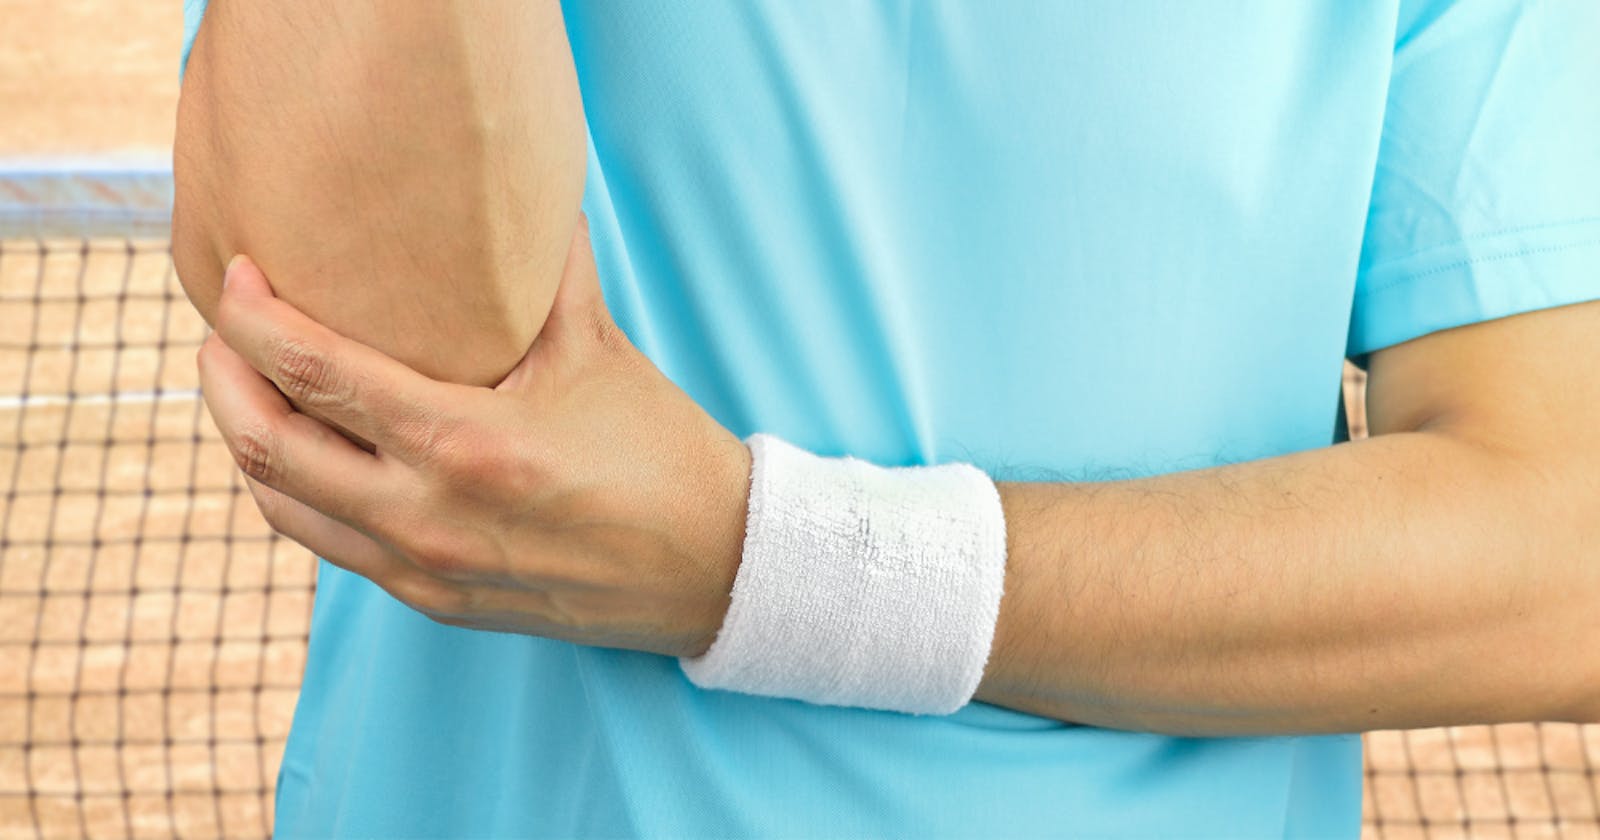 Home Remedies for Tennis Elbow: Natural Treatment for Elbow Pain